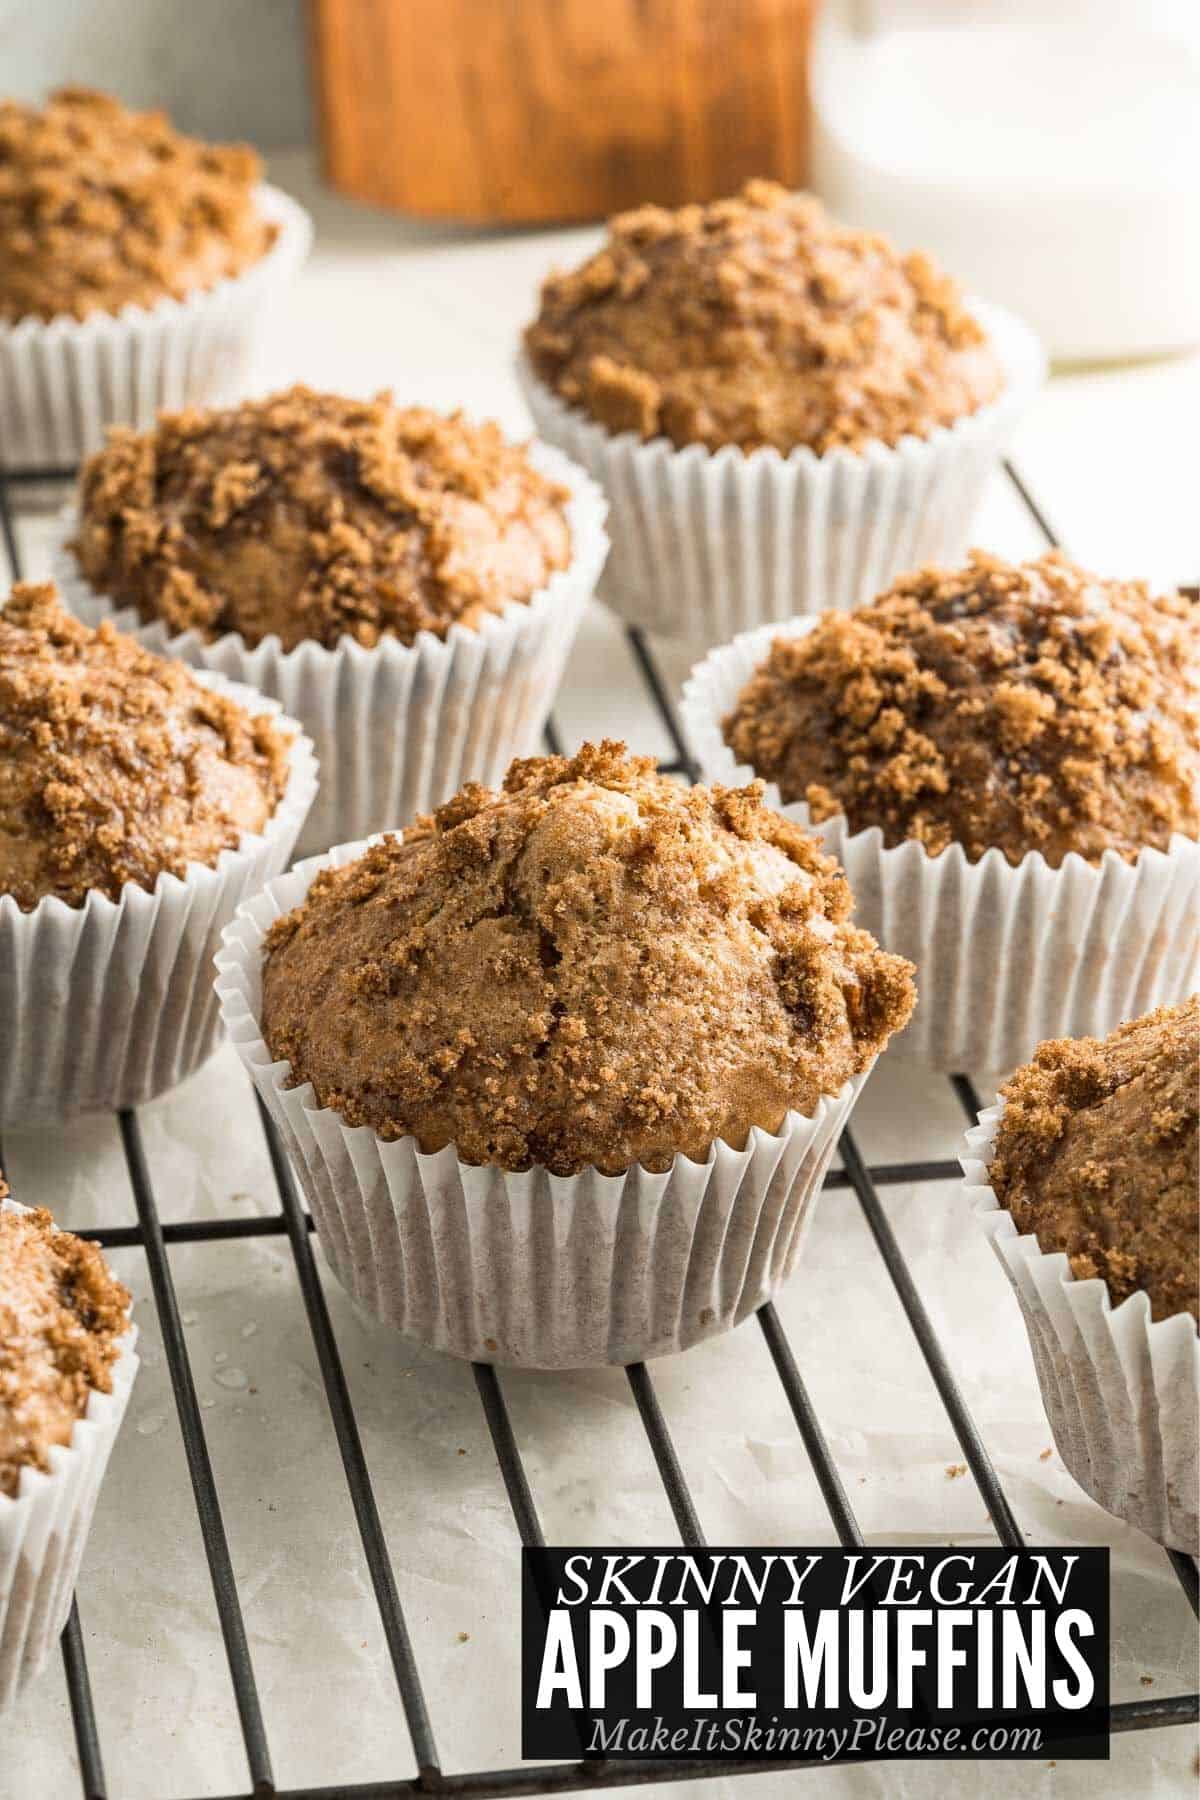 Apple Muffins with title overlay